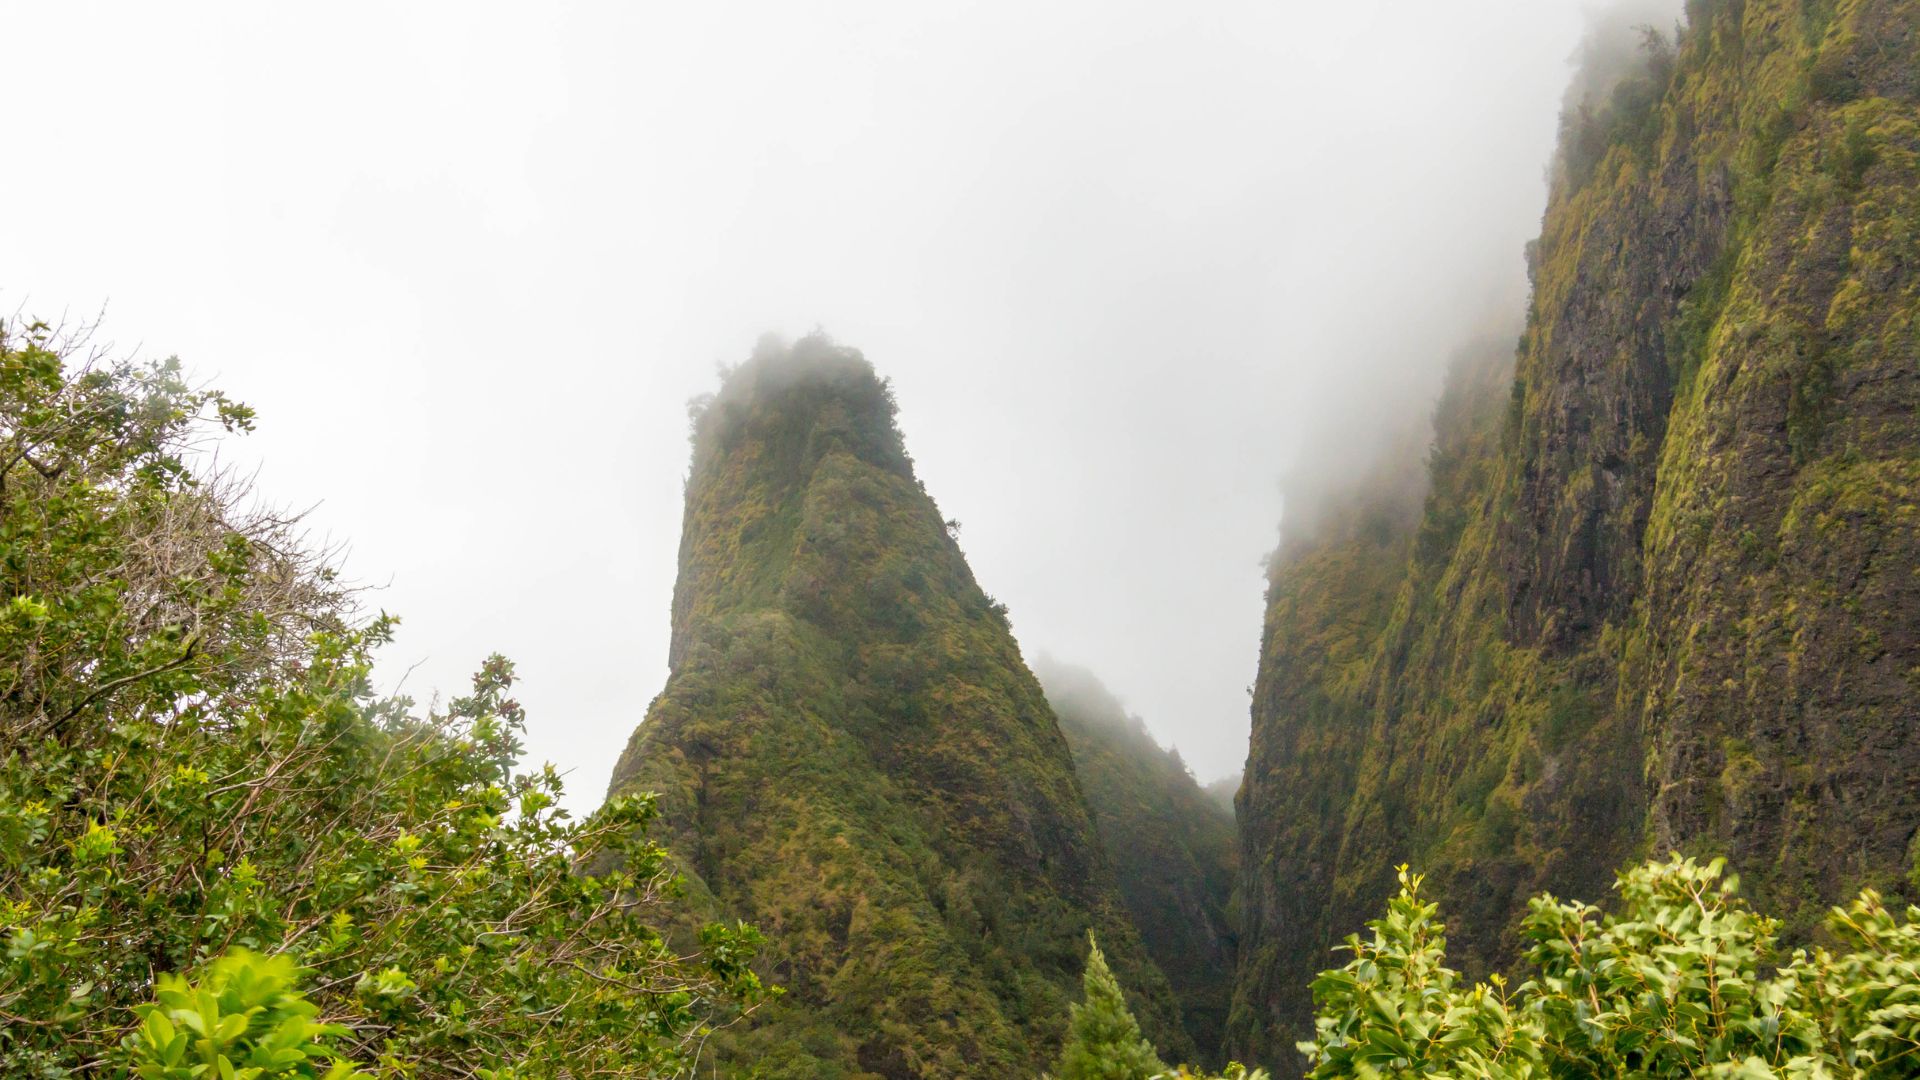 Iao Valley State Monument, Maui